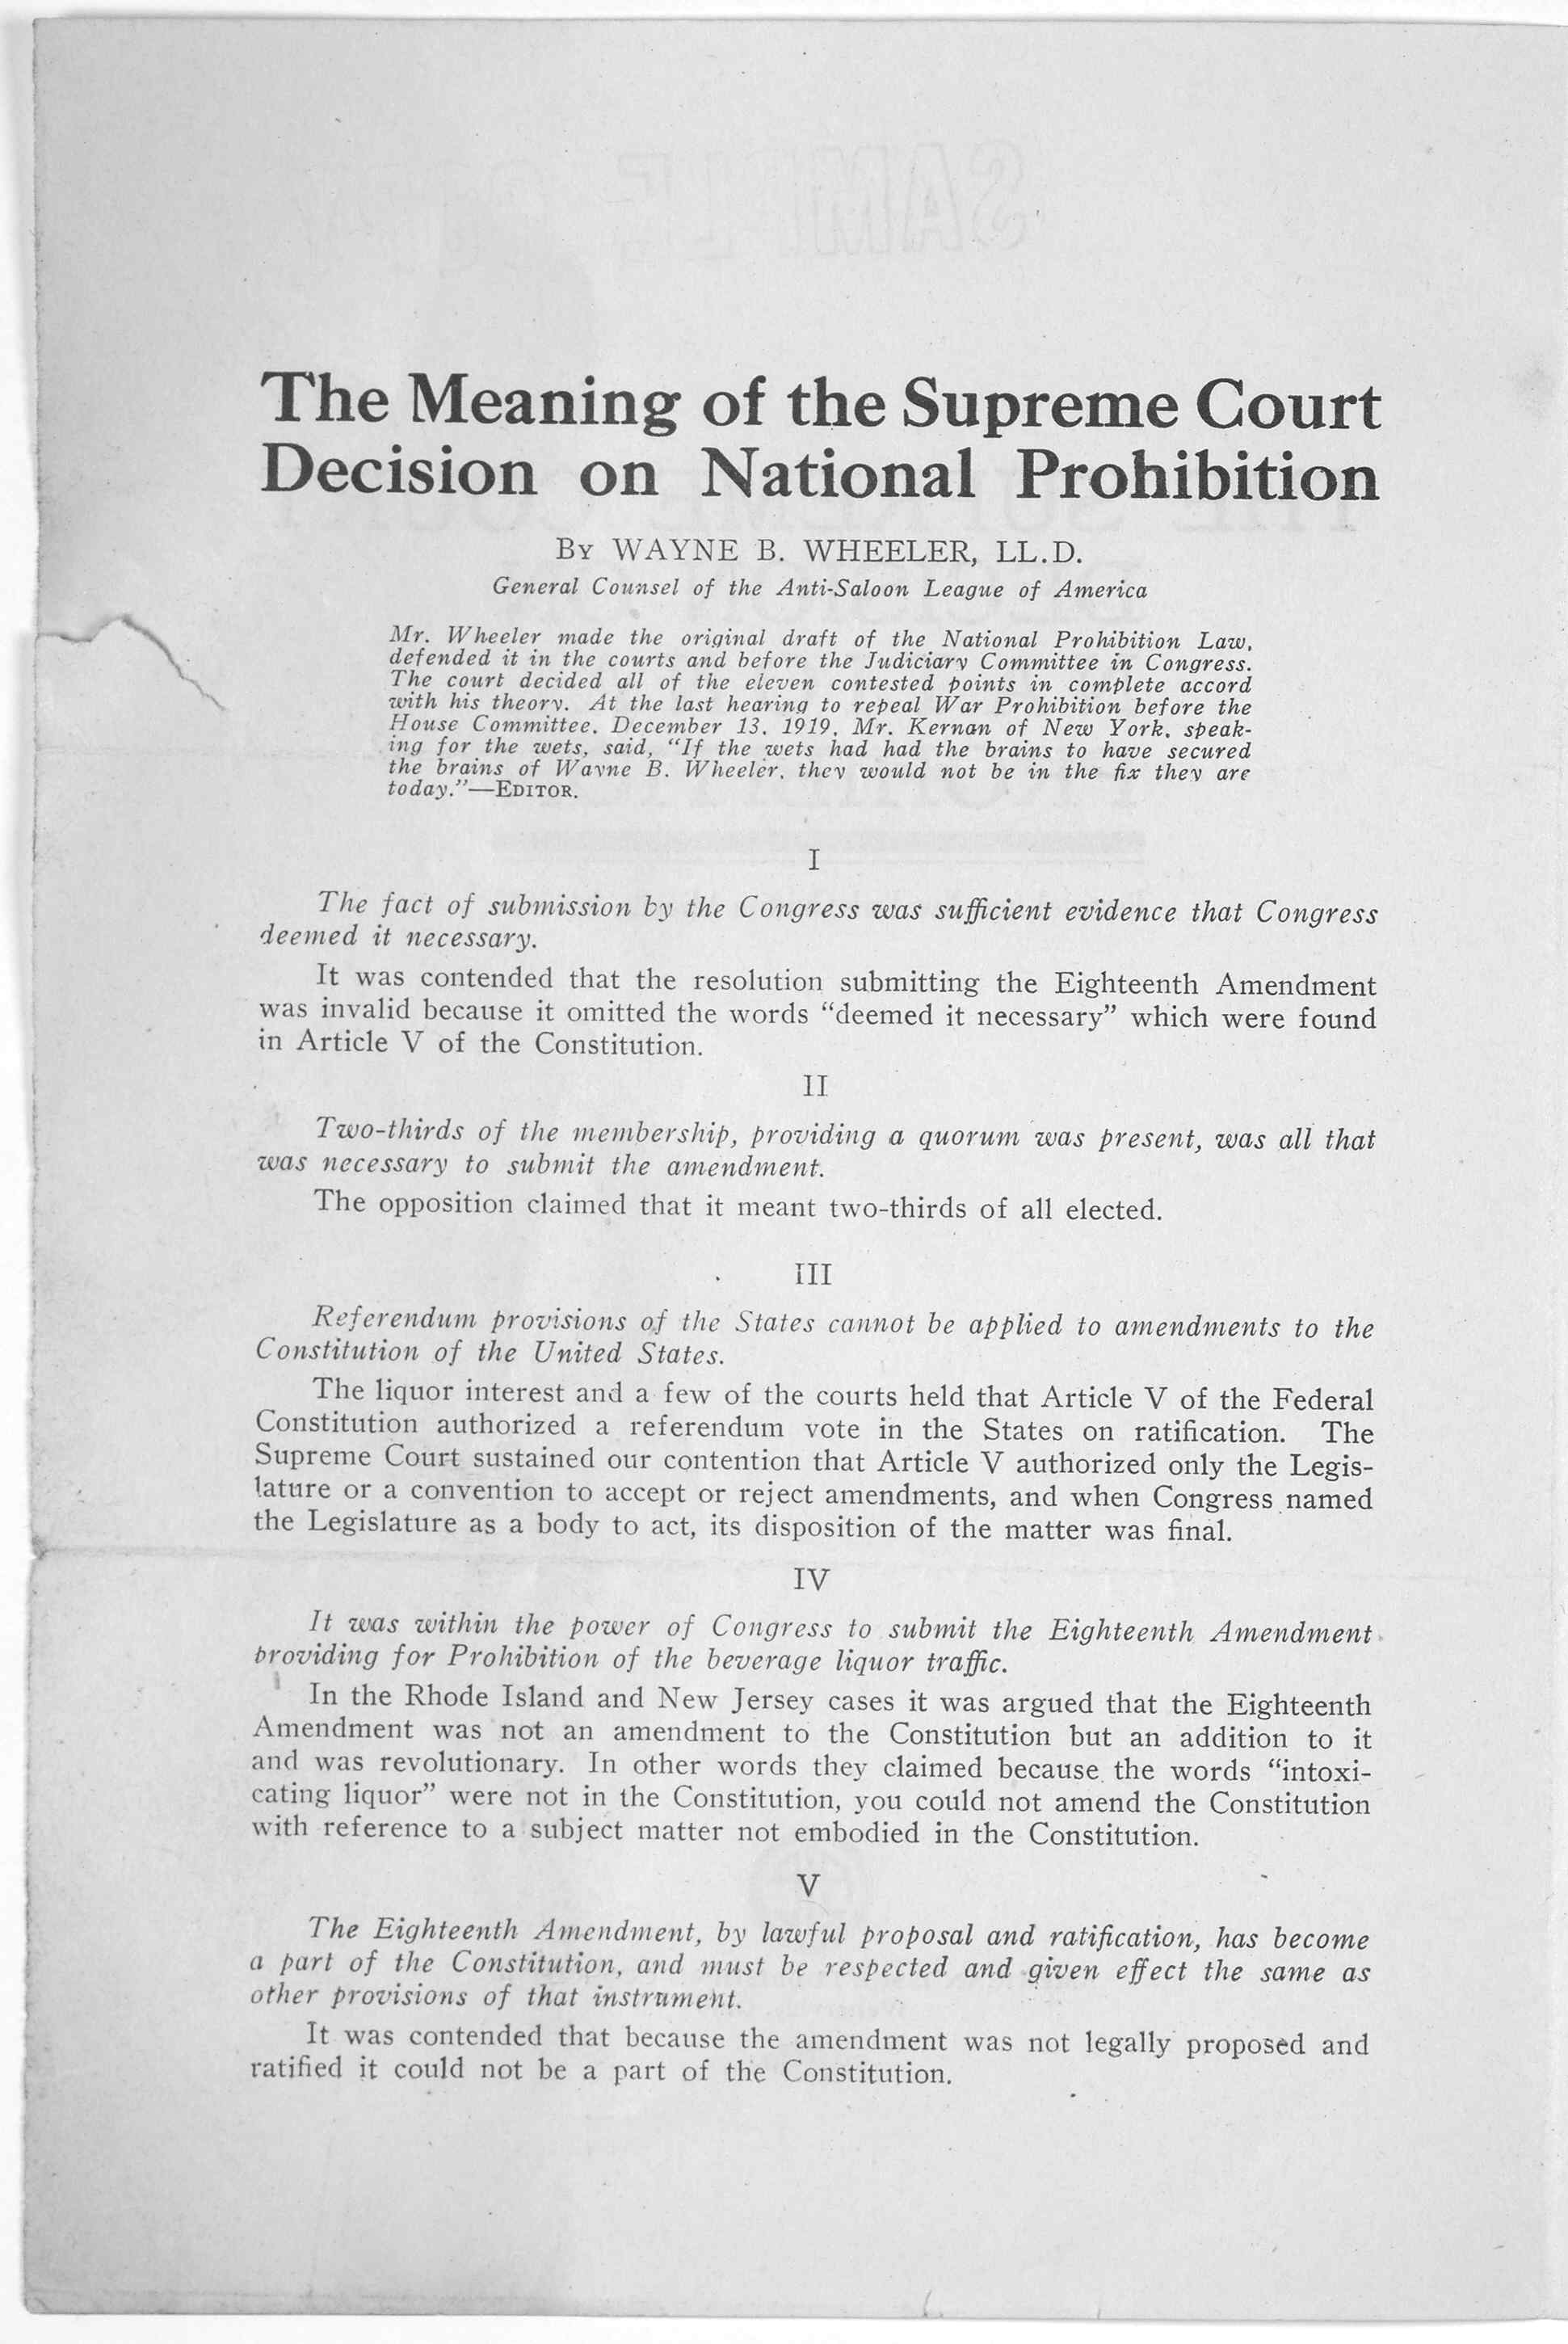 Wayne B. Wheeler, The Supreme Court Decision on National Prohibition. Reprinted from New York Christian Advocate, July 1920. (Westerville, Ohio: American Issue Publishing Company, [1920]), page 2. Library of Congress Printed Ephemera Collection, Portfolio 138, Folder 24a, http://hdl.loc.gov/loc.rbc/rbpe.1380240a